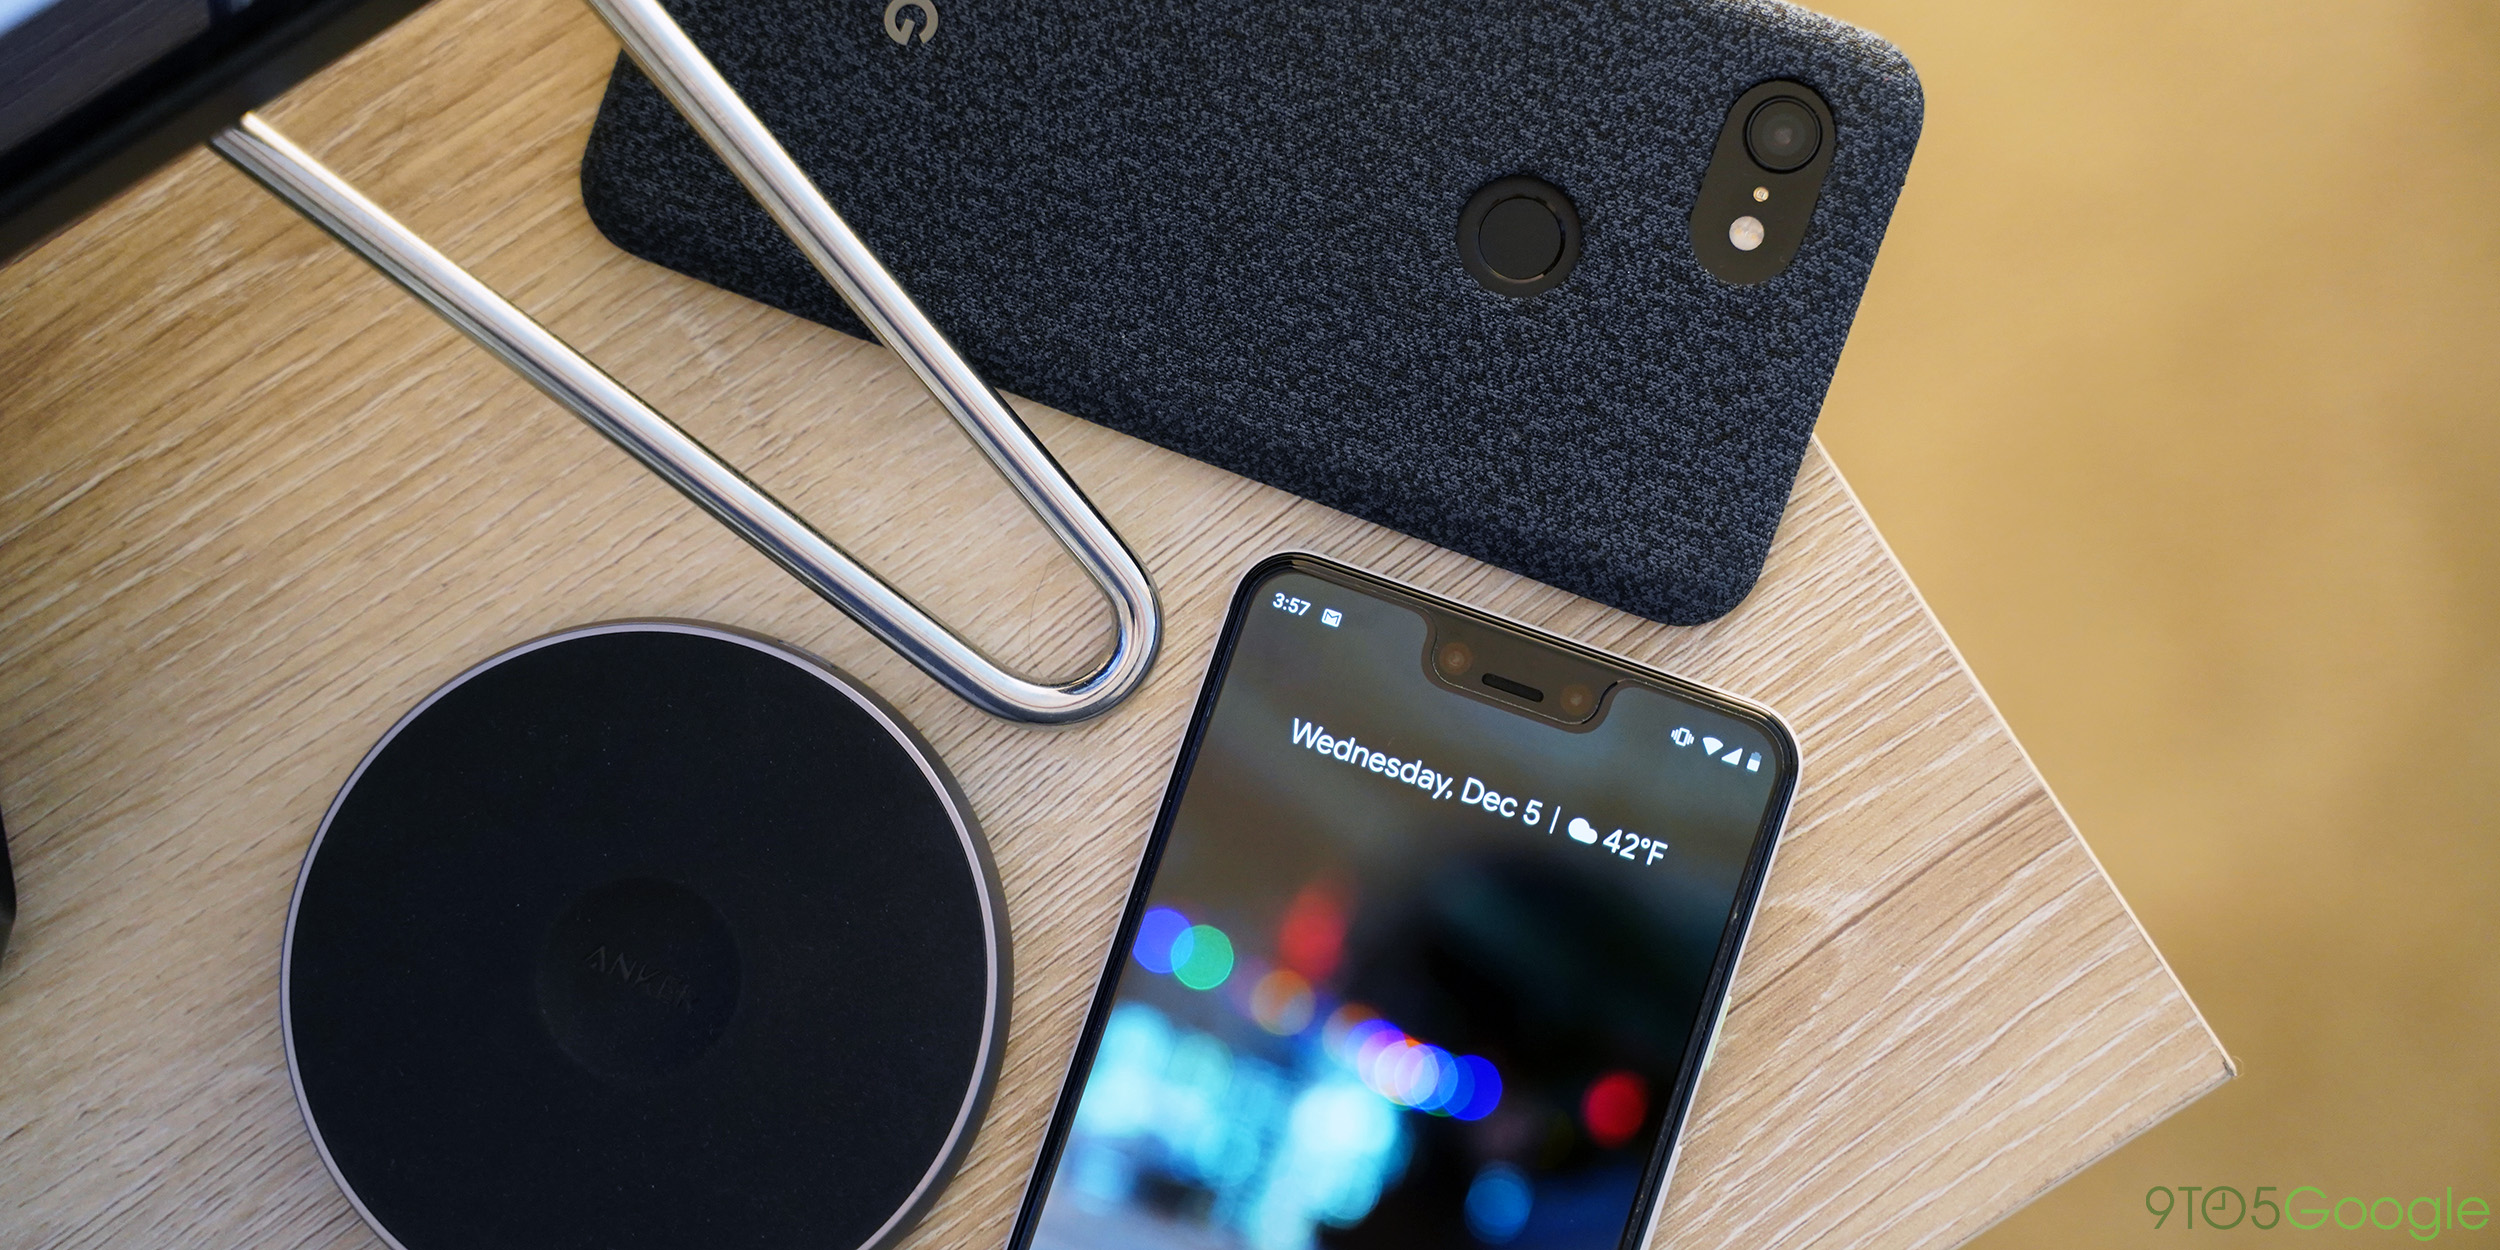 Google Store and Google Fi discount Pixel 3, Pixel 3 XL by $150 off - Will The Pixel 2xl Have A Black Friday Deal Reddit